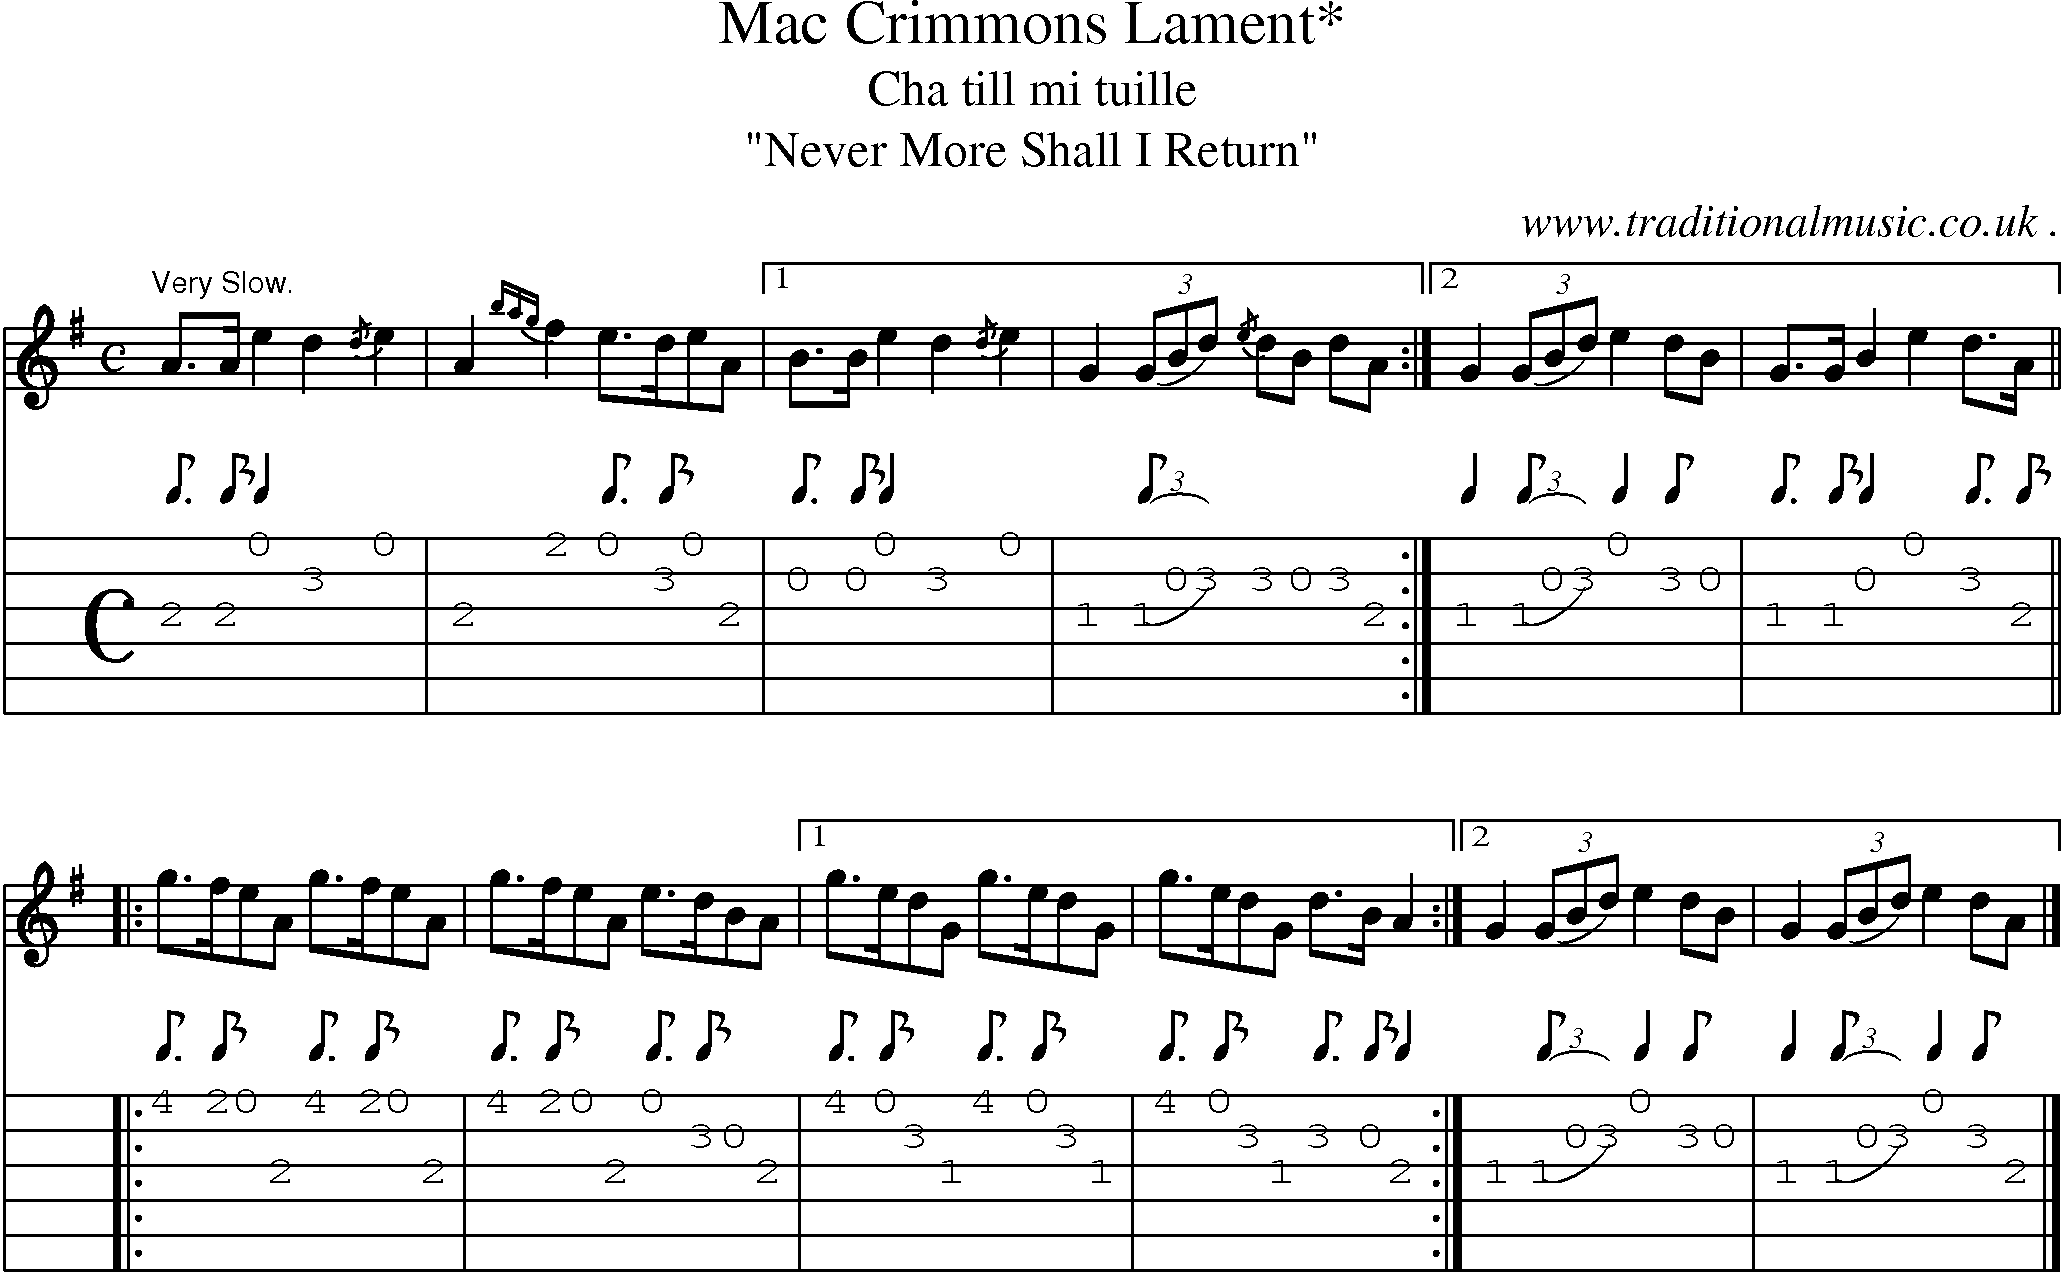 Sheet-music  score, Chords and Guitar Tabs for Mac Crimmons Lament